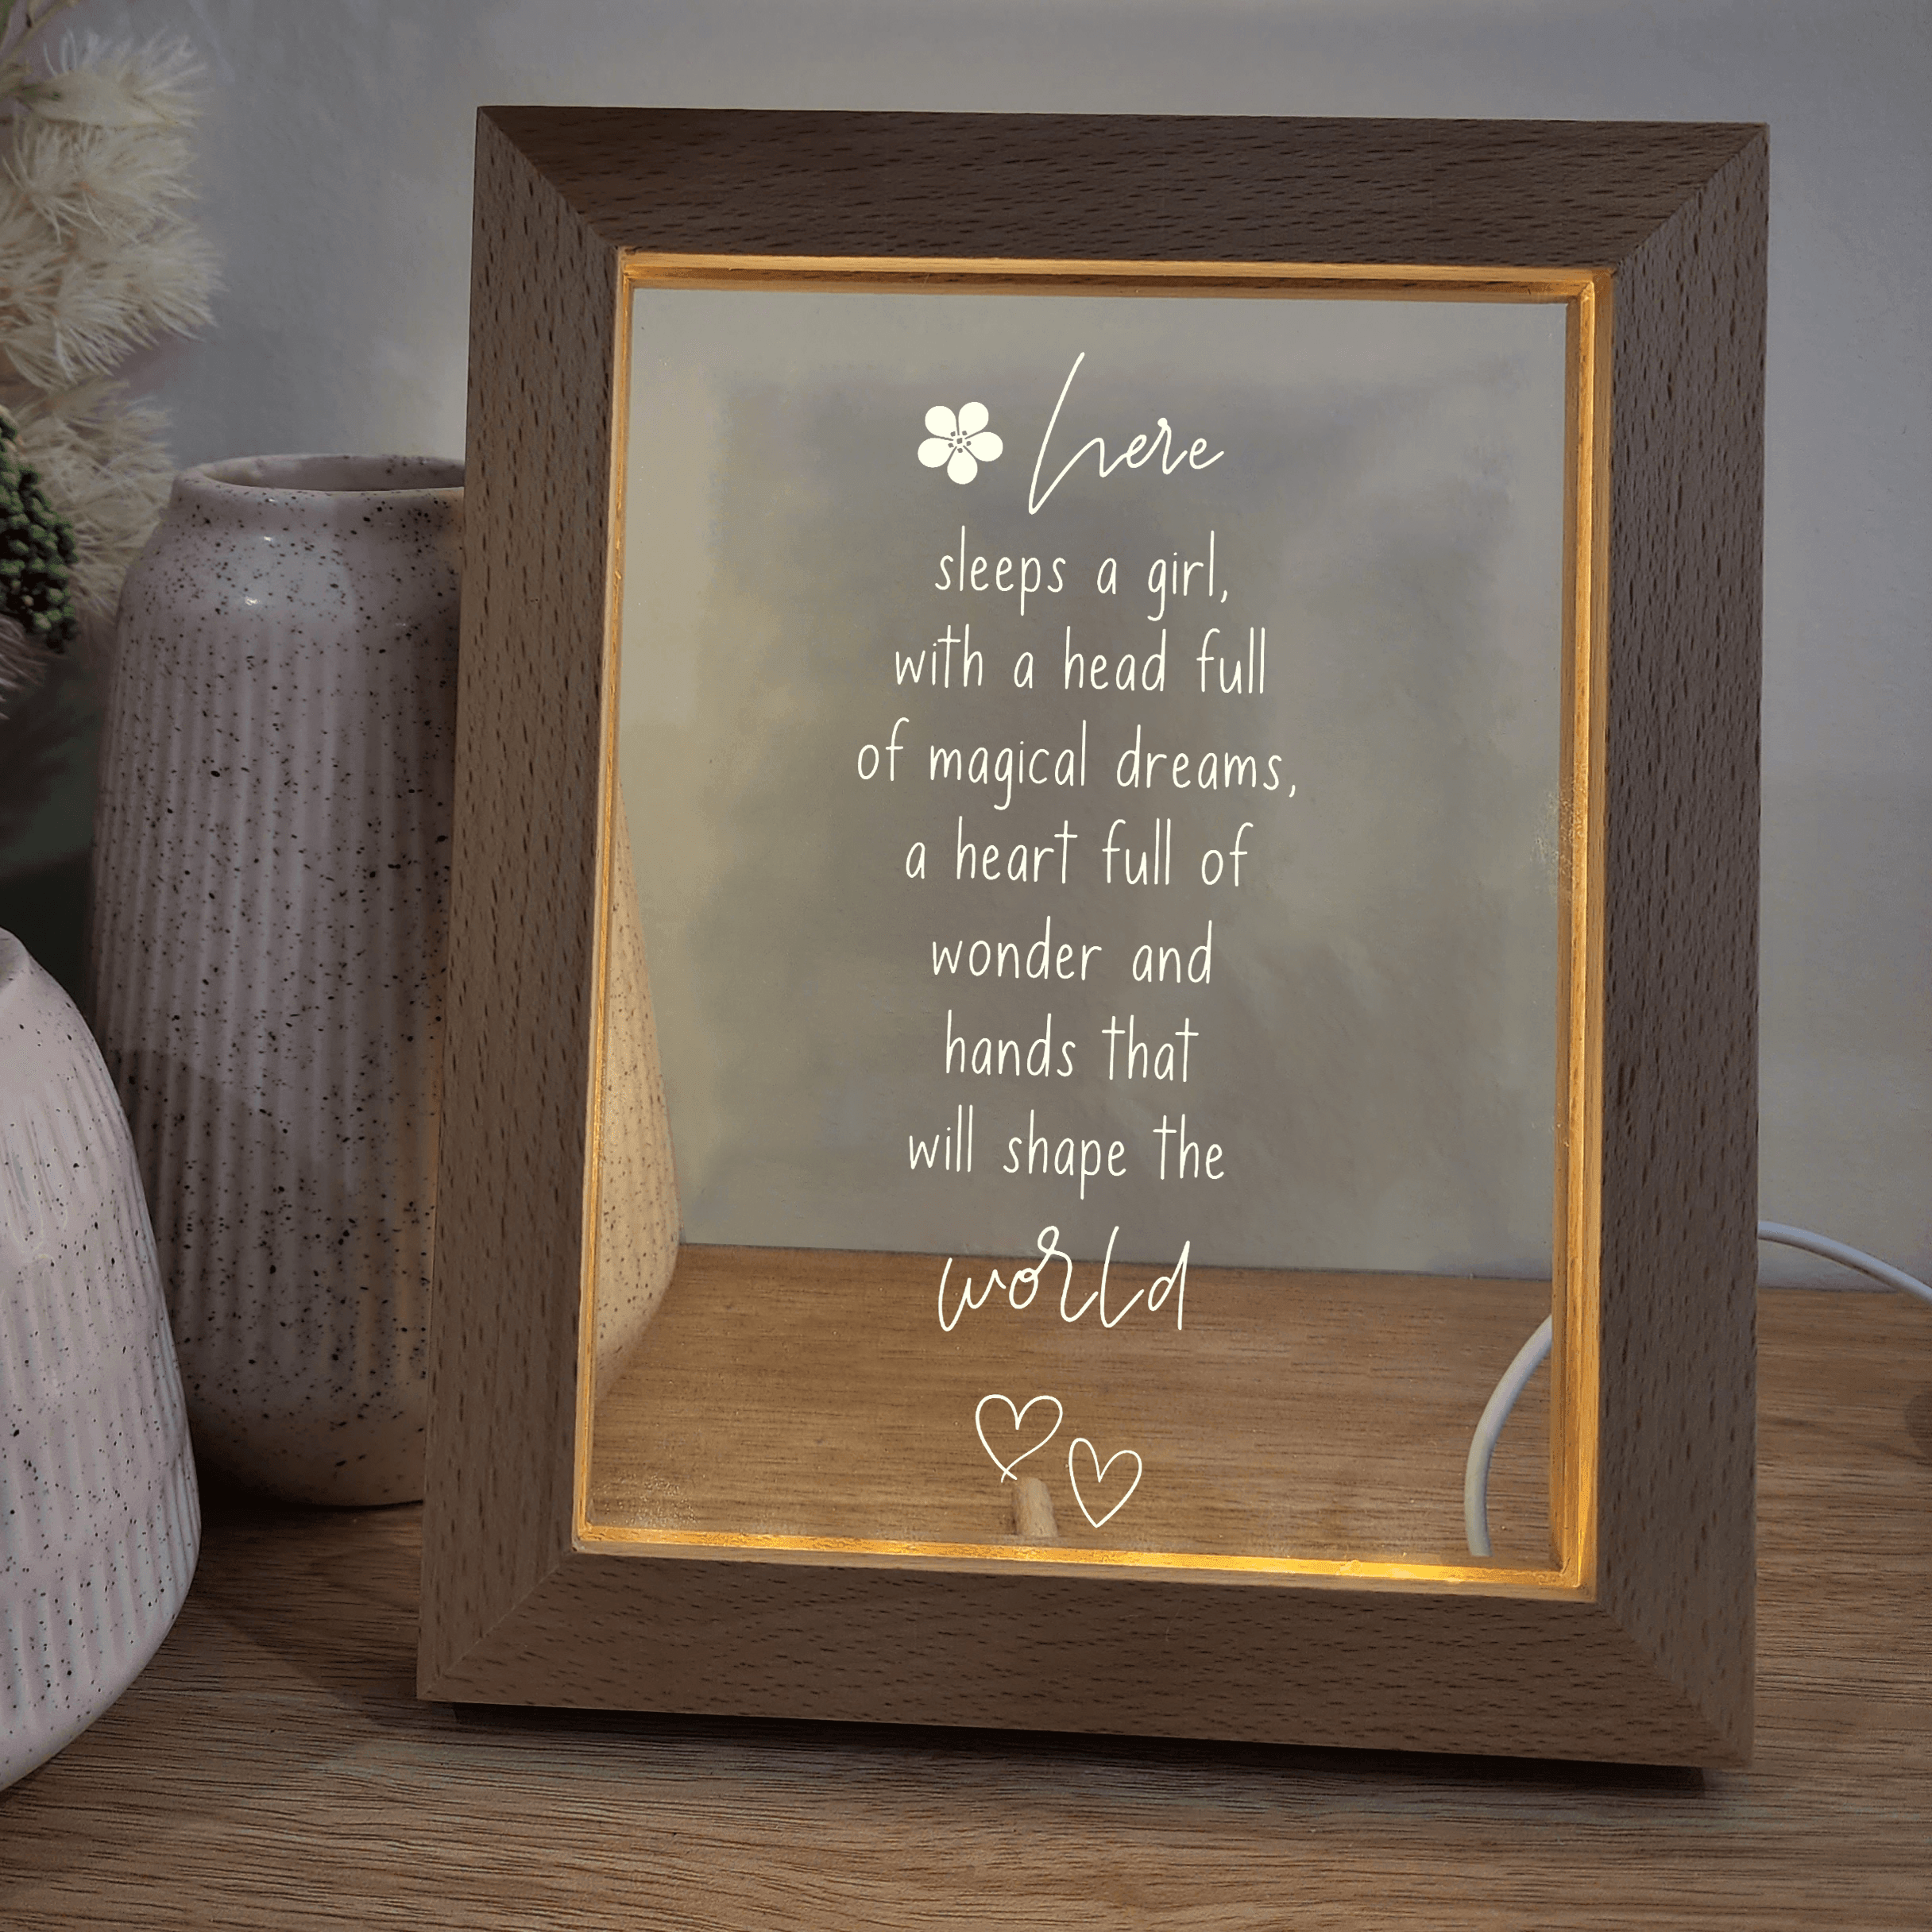 Timber Night Light Frame 🌙 - Quote - Here Sleeps a Girl - The Willow Corner